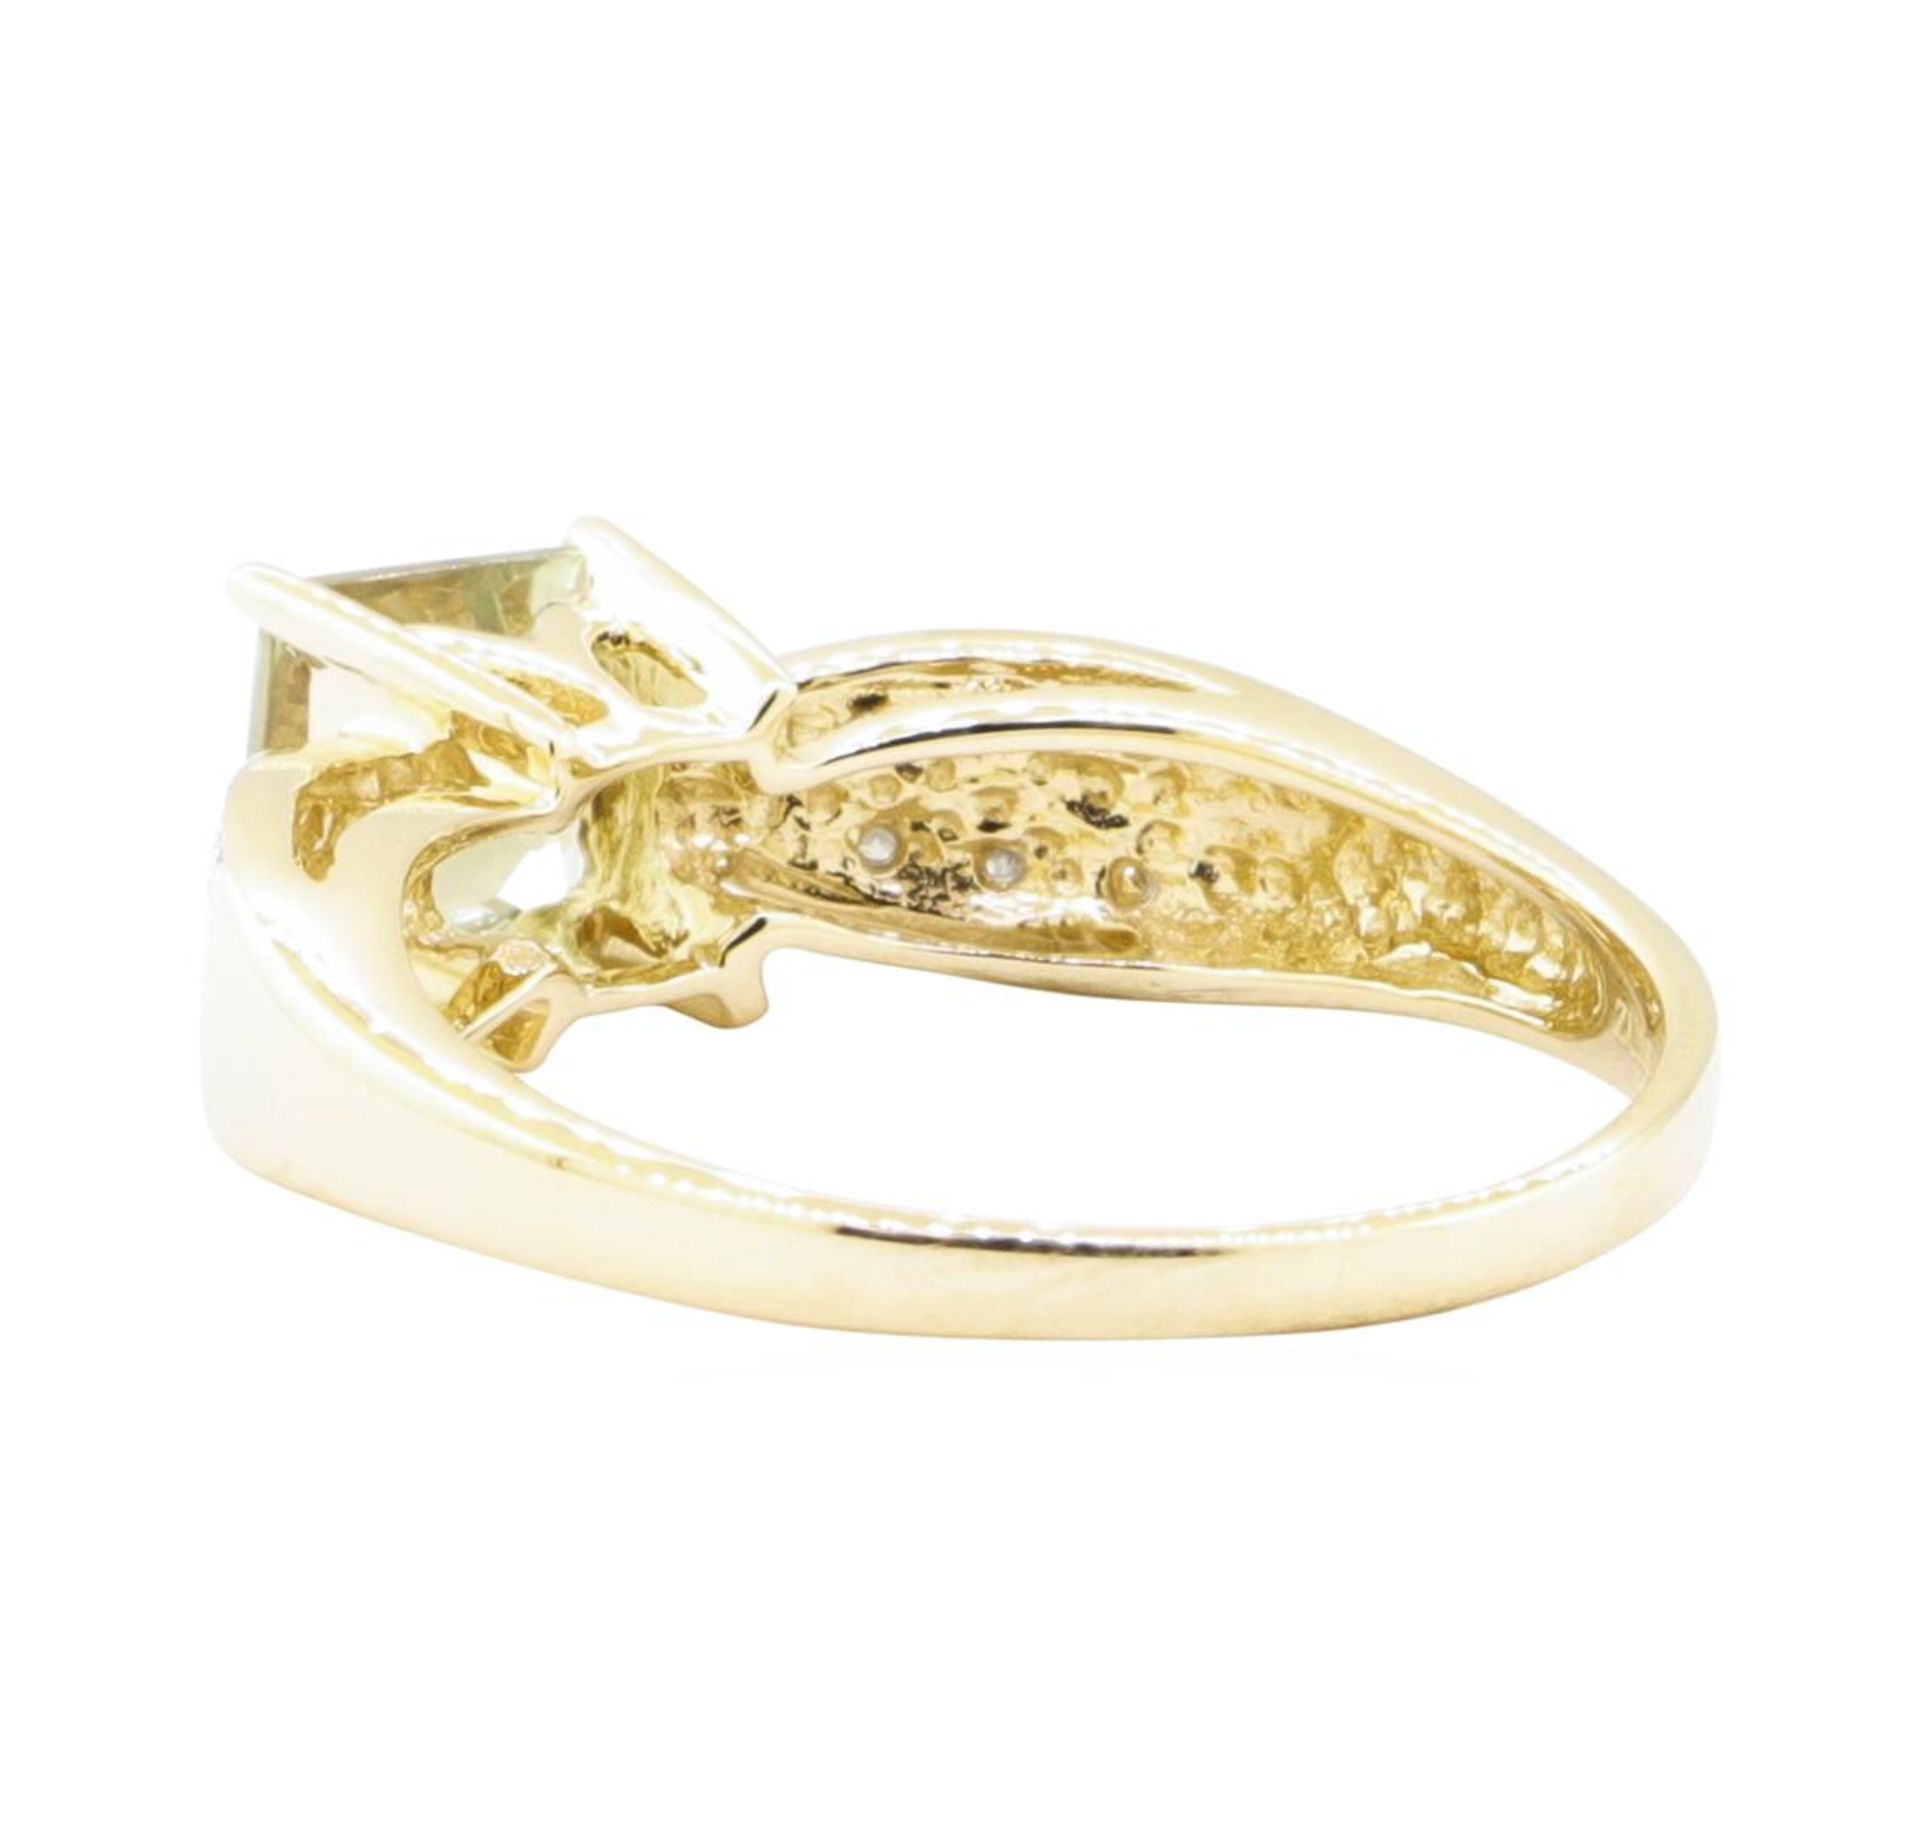 2.12 ctw Zultanite And Diamond Ring - 14KT Yellow Gold - Image 3 of 5